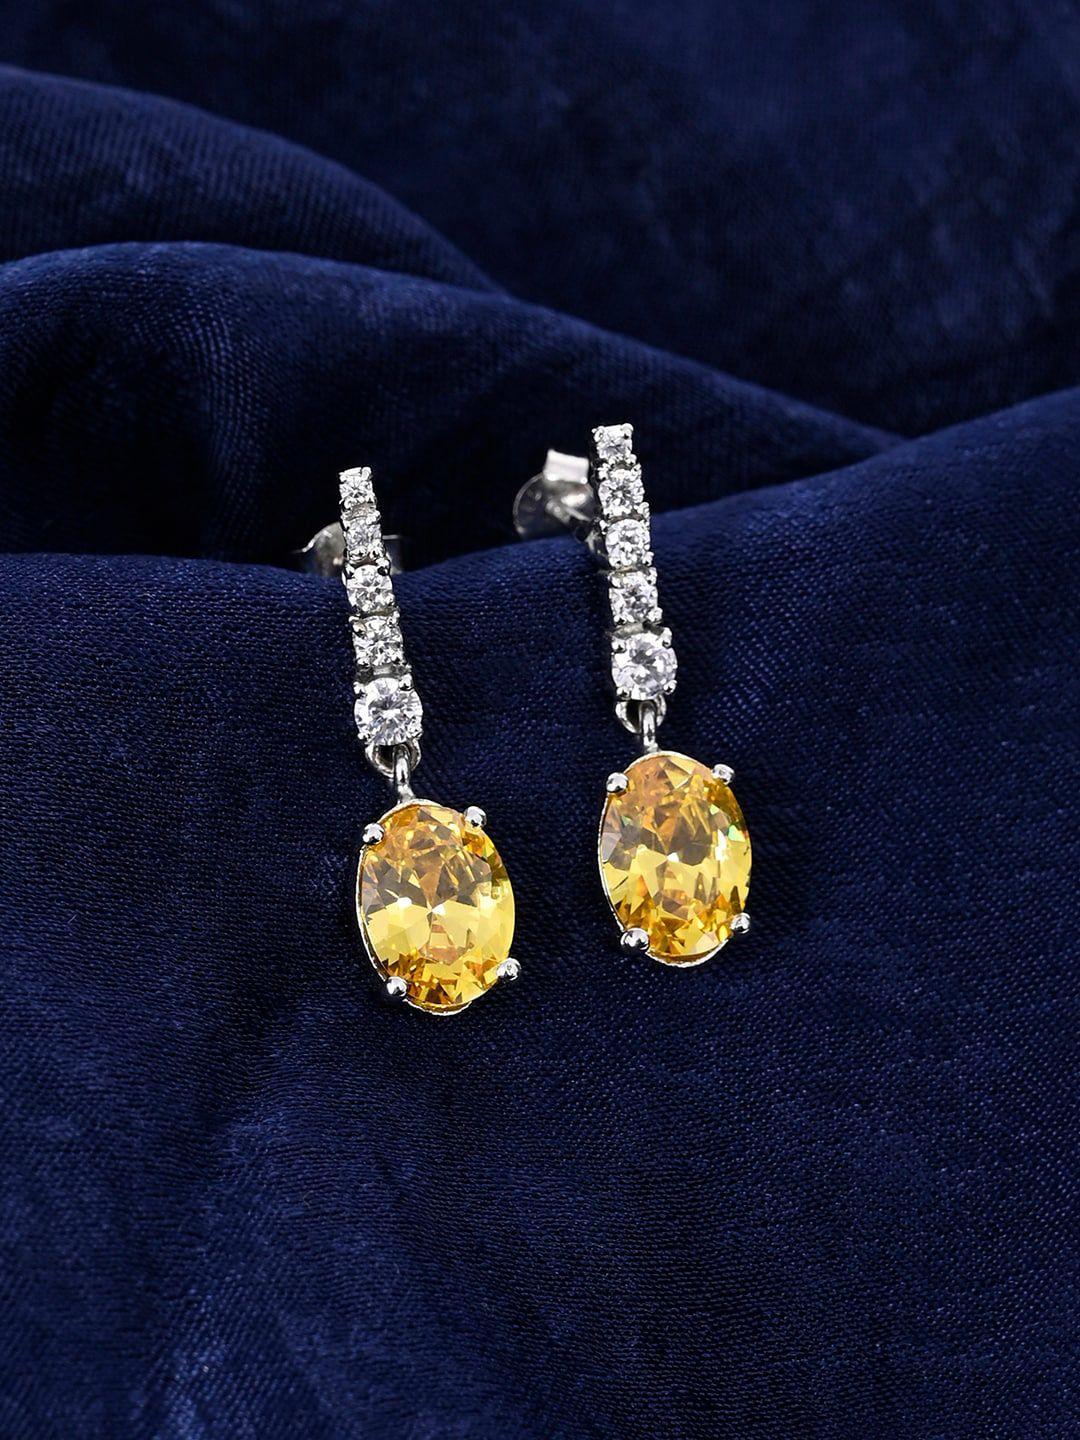 mikoto by fablestreet 925 sterling silver rhodium-plated yellow zircon handcrafted earrings